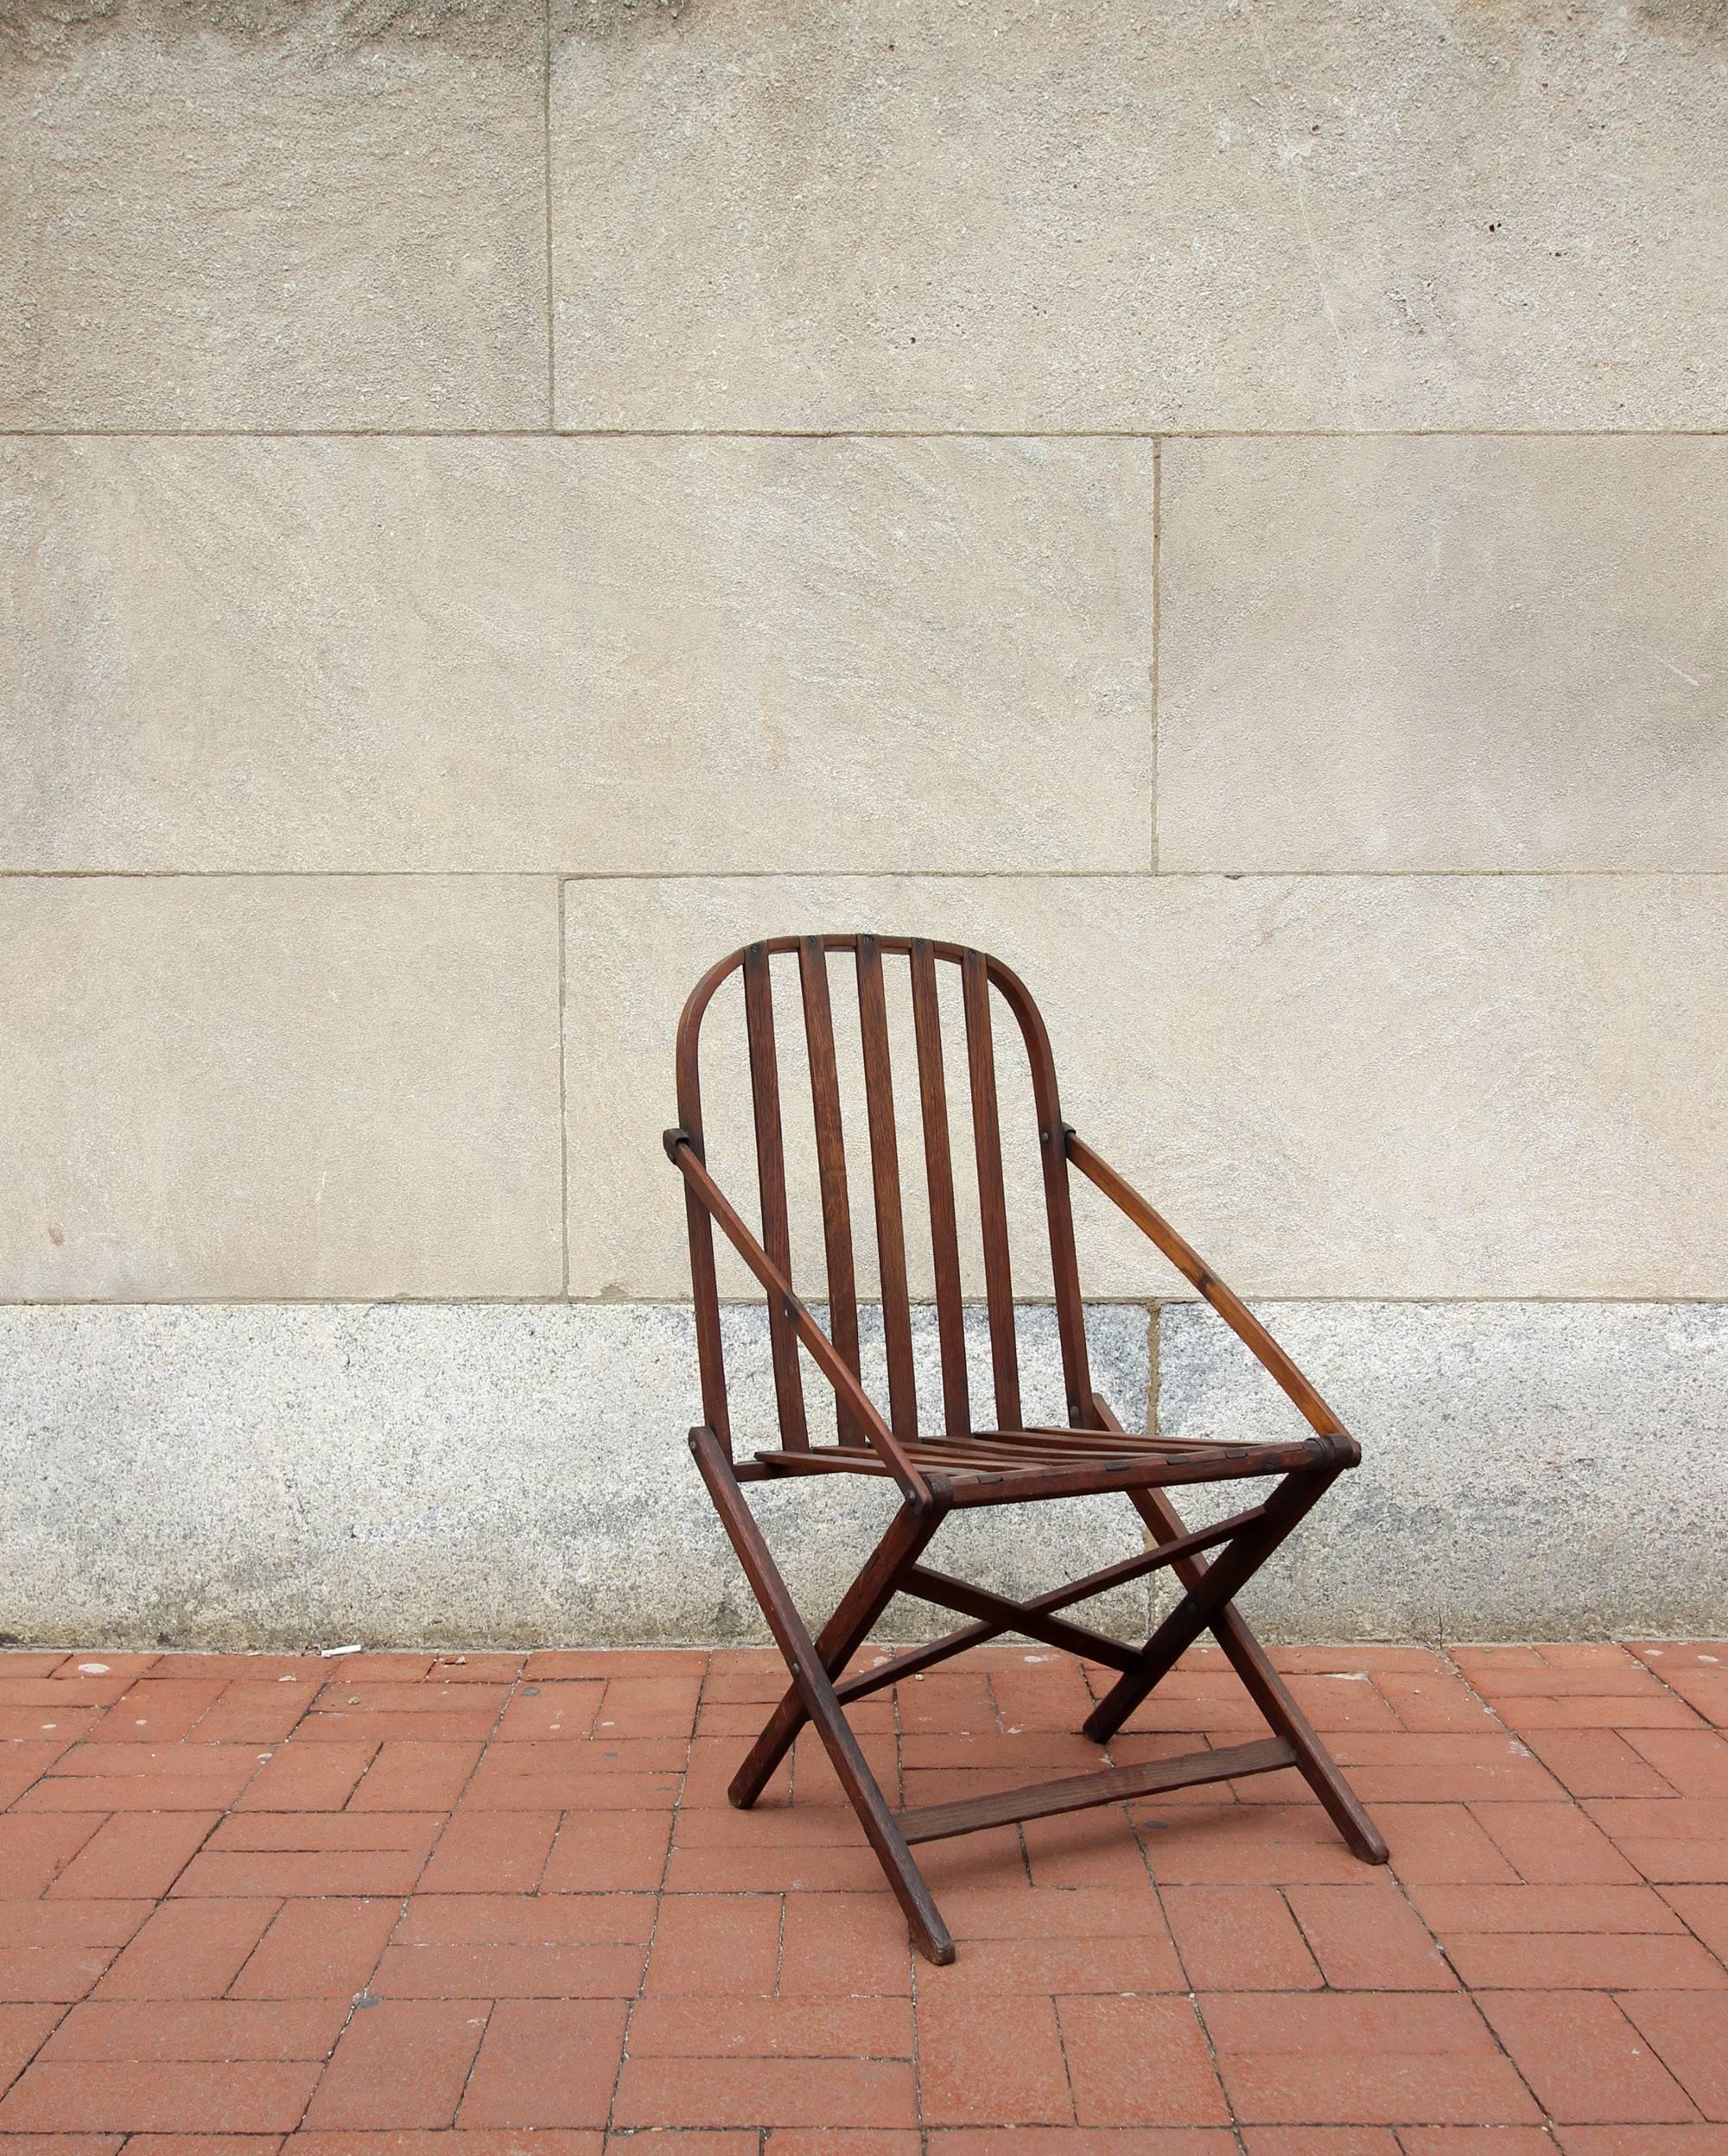 Sculptural and yet functional folding camp chair; on the smaller size and very portable. Walnut wood, American, early 20th century. Wonderful dry patina and color to wood.